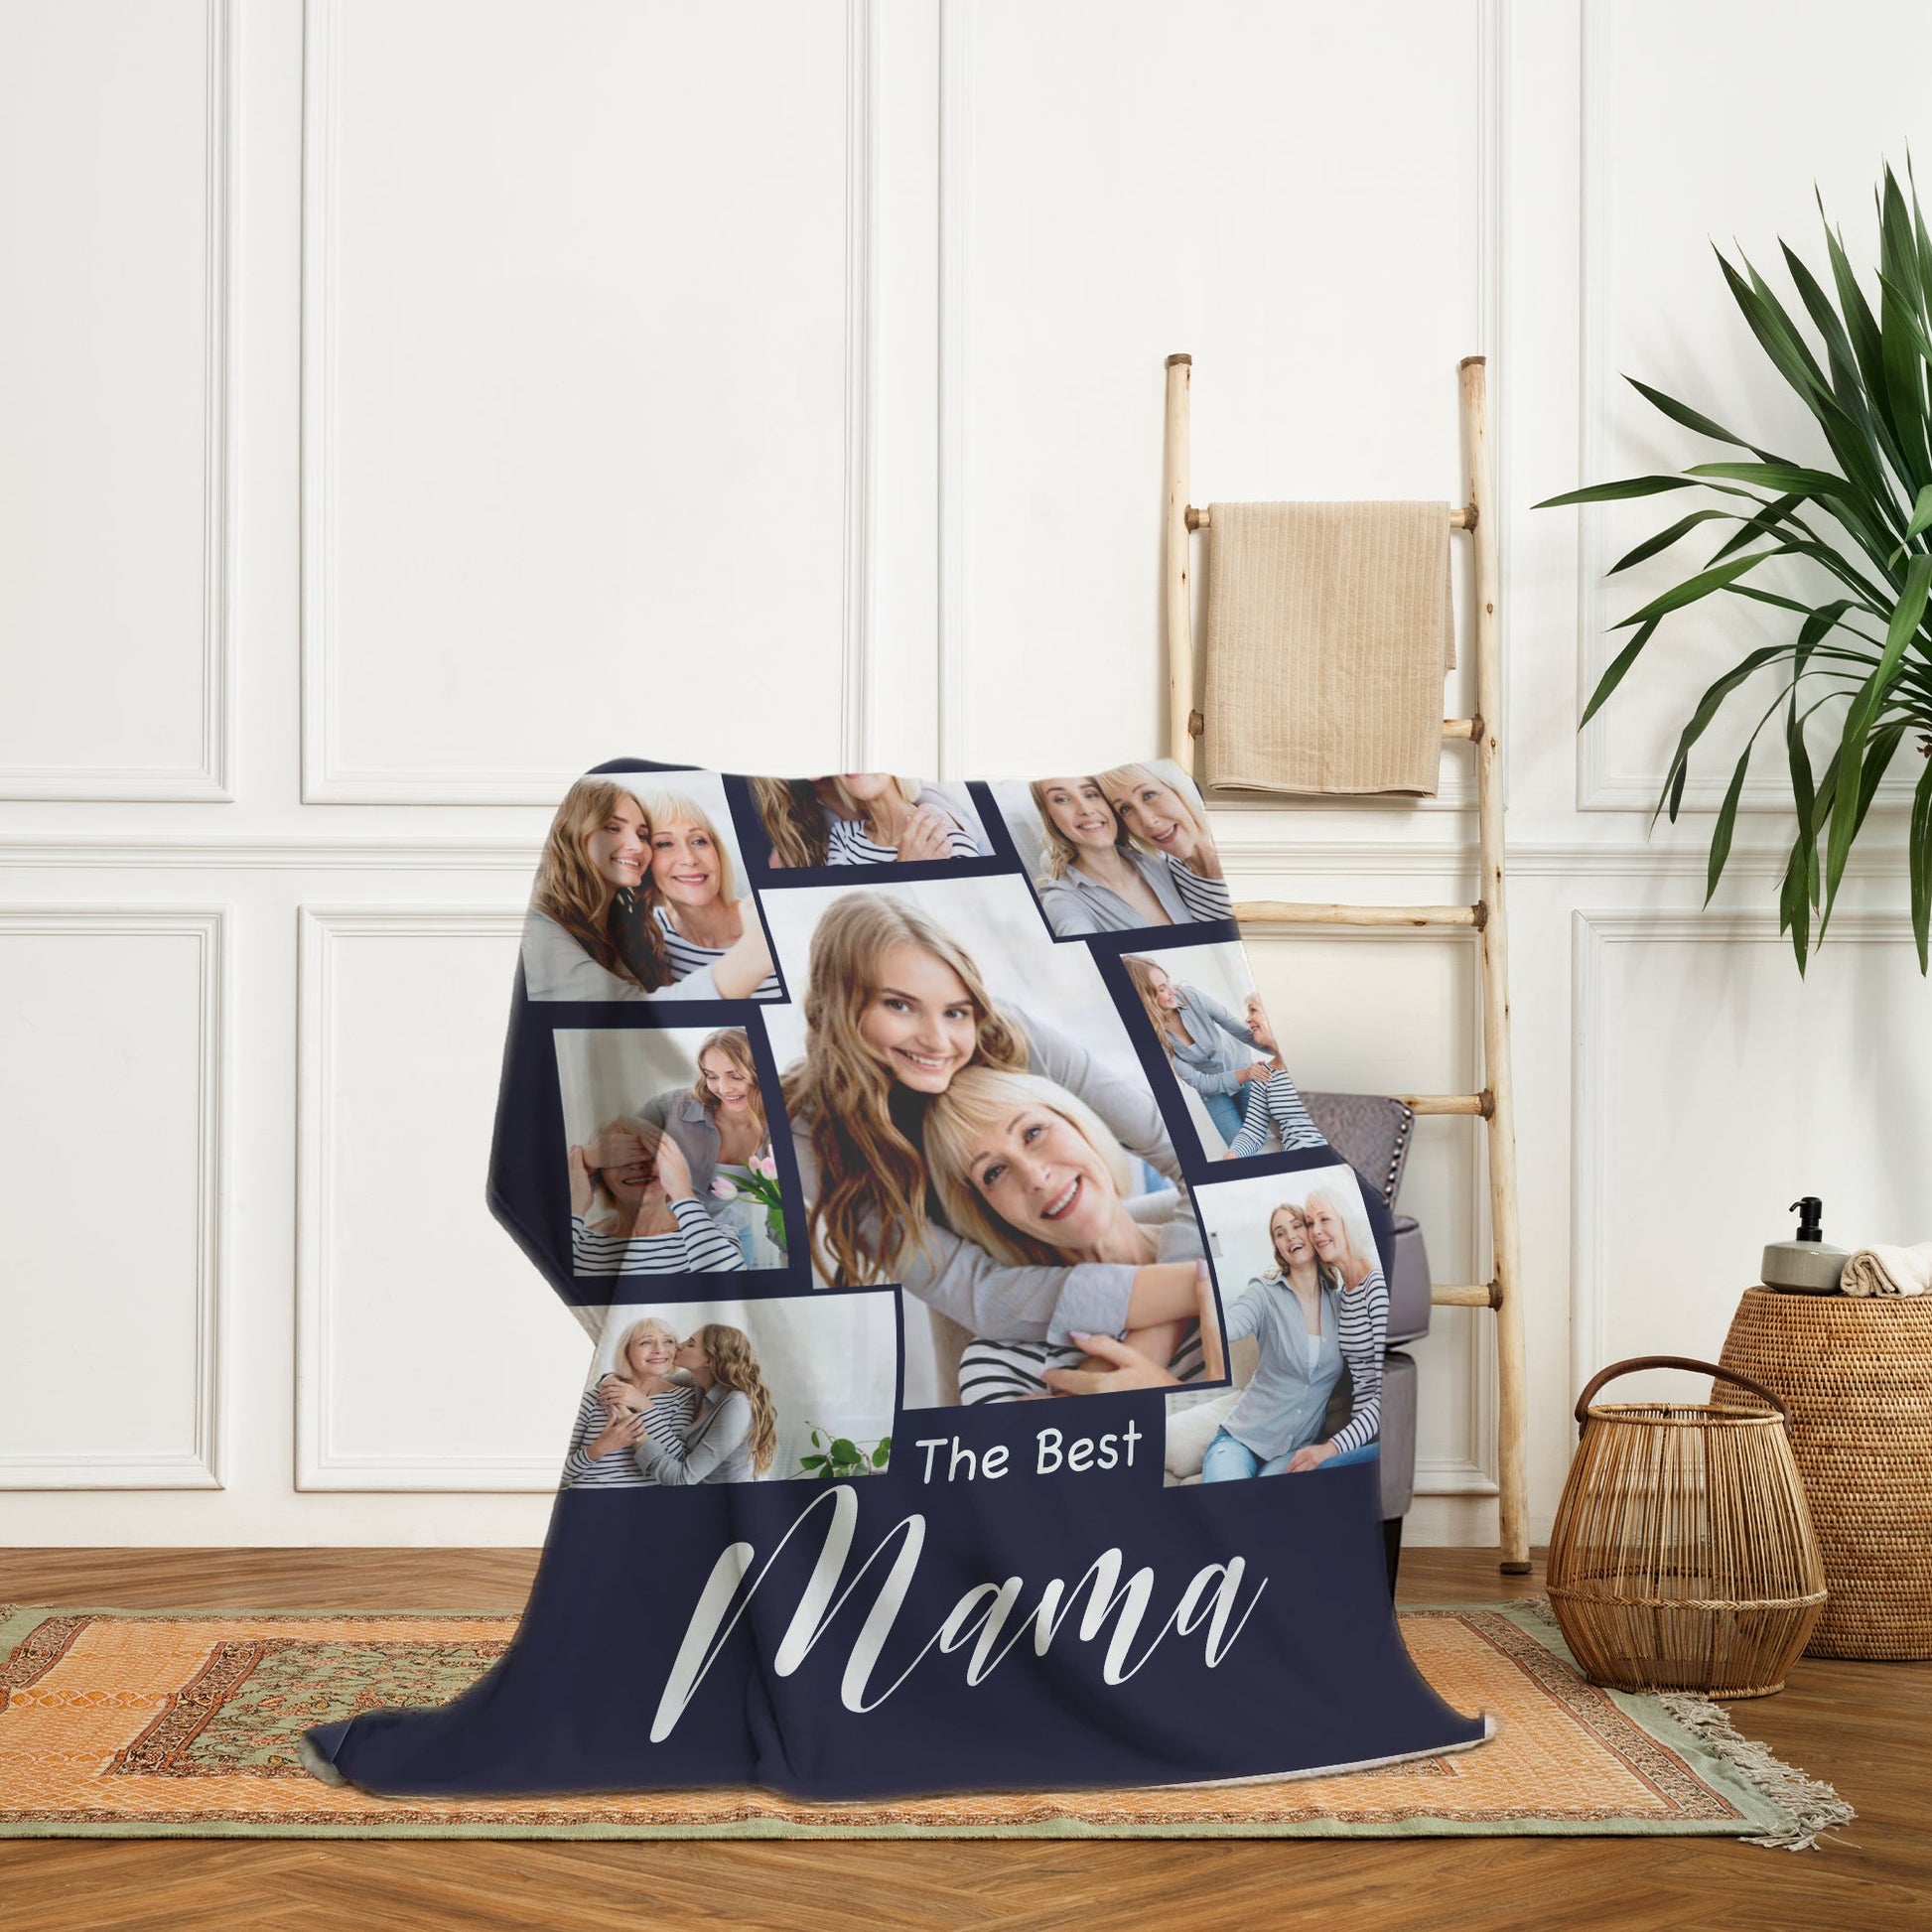 Blanket Gift Ideas For Mom, Thoughtful First Mothers Day Gifts